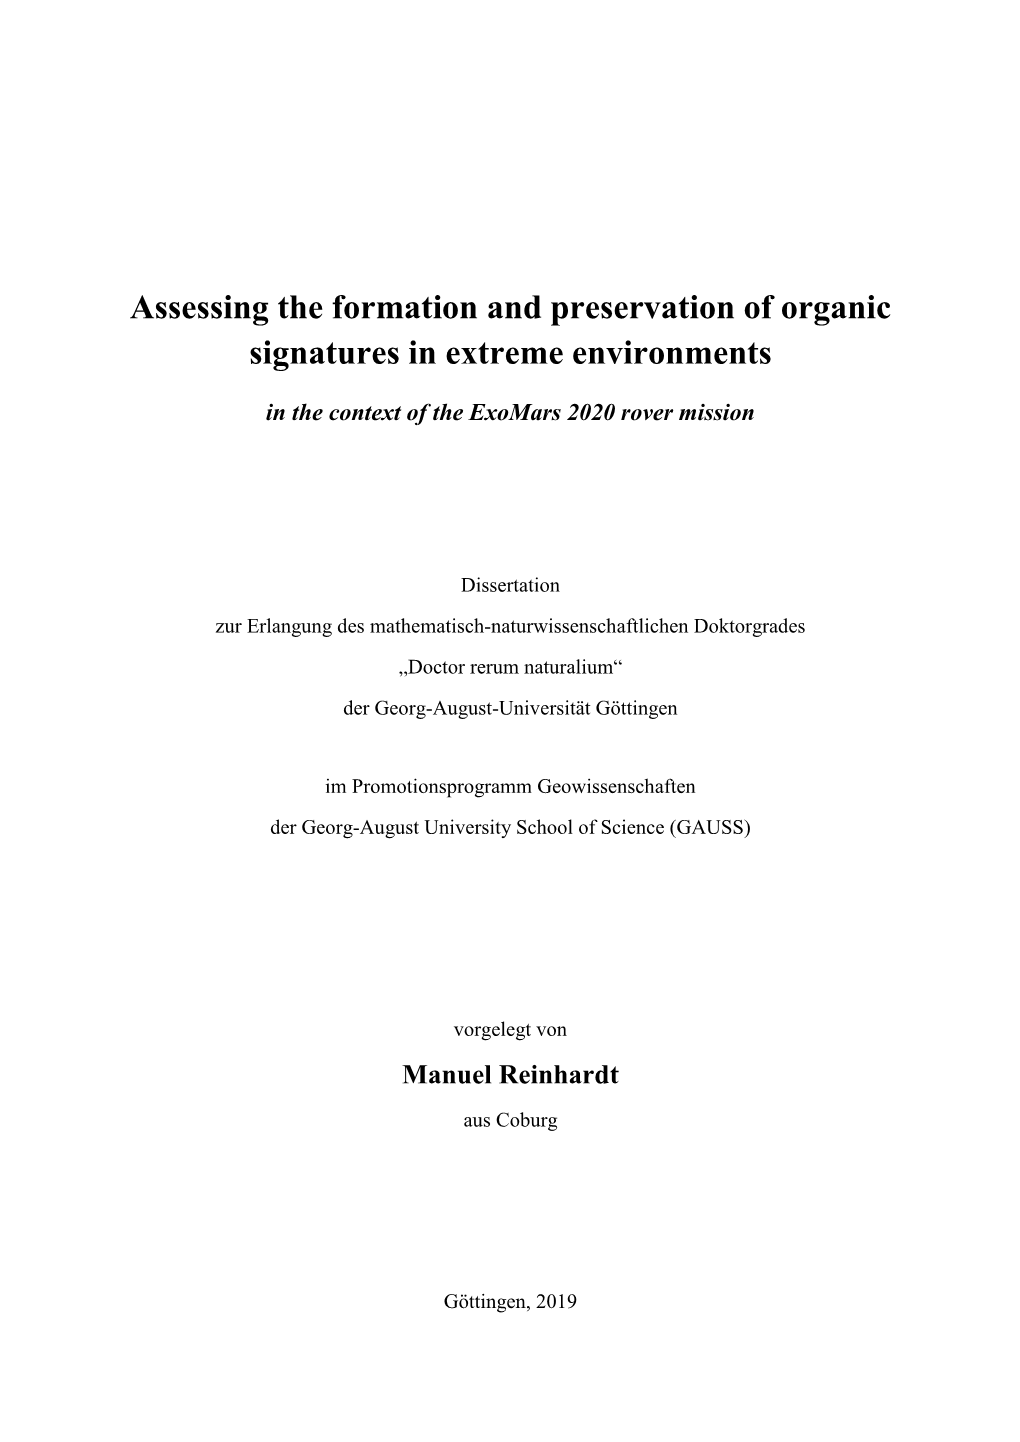 Assessing the Formation and Preservation of Organic Signatures in Extreme Environments